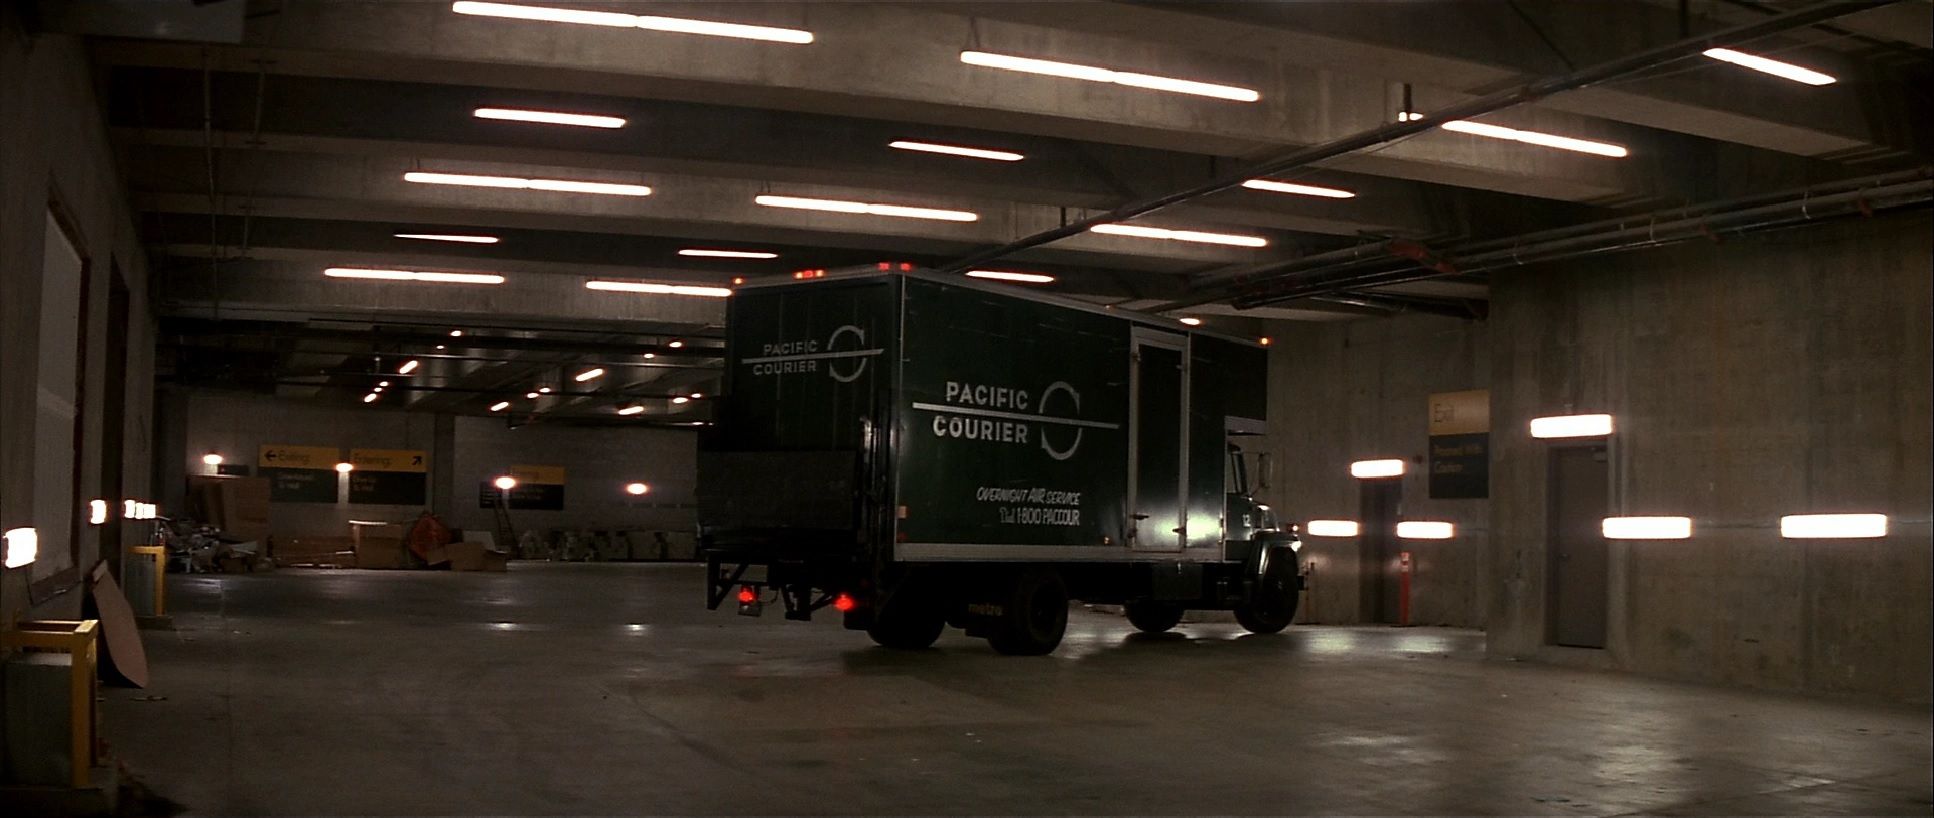 Die Hard screenshot showing the truck the terrorists use.